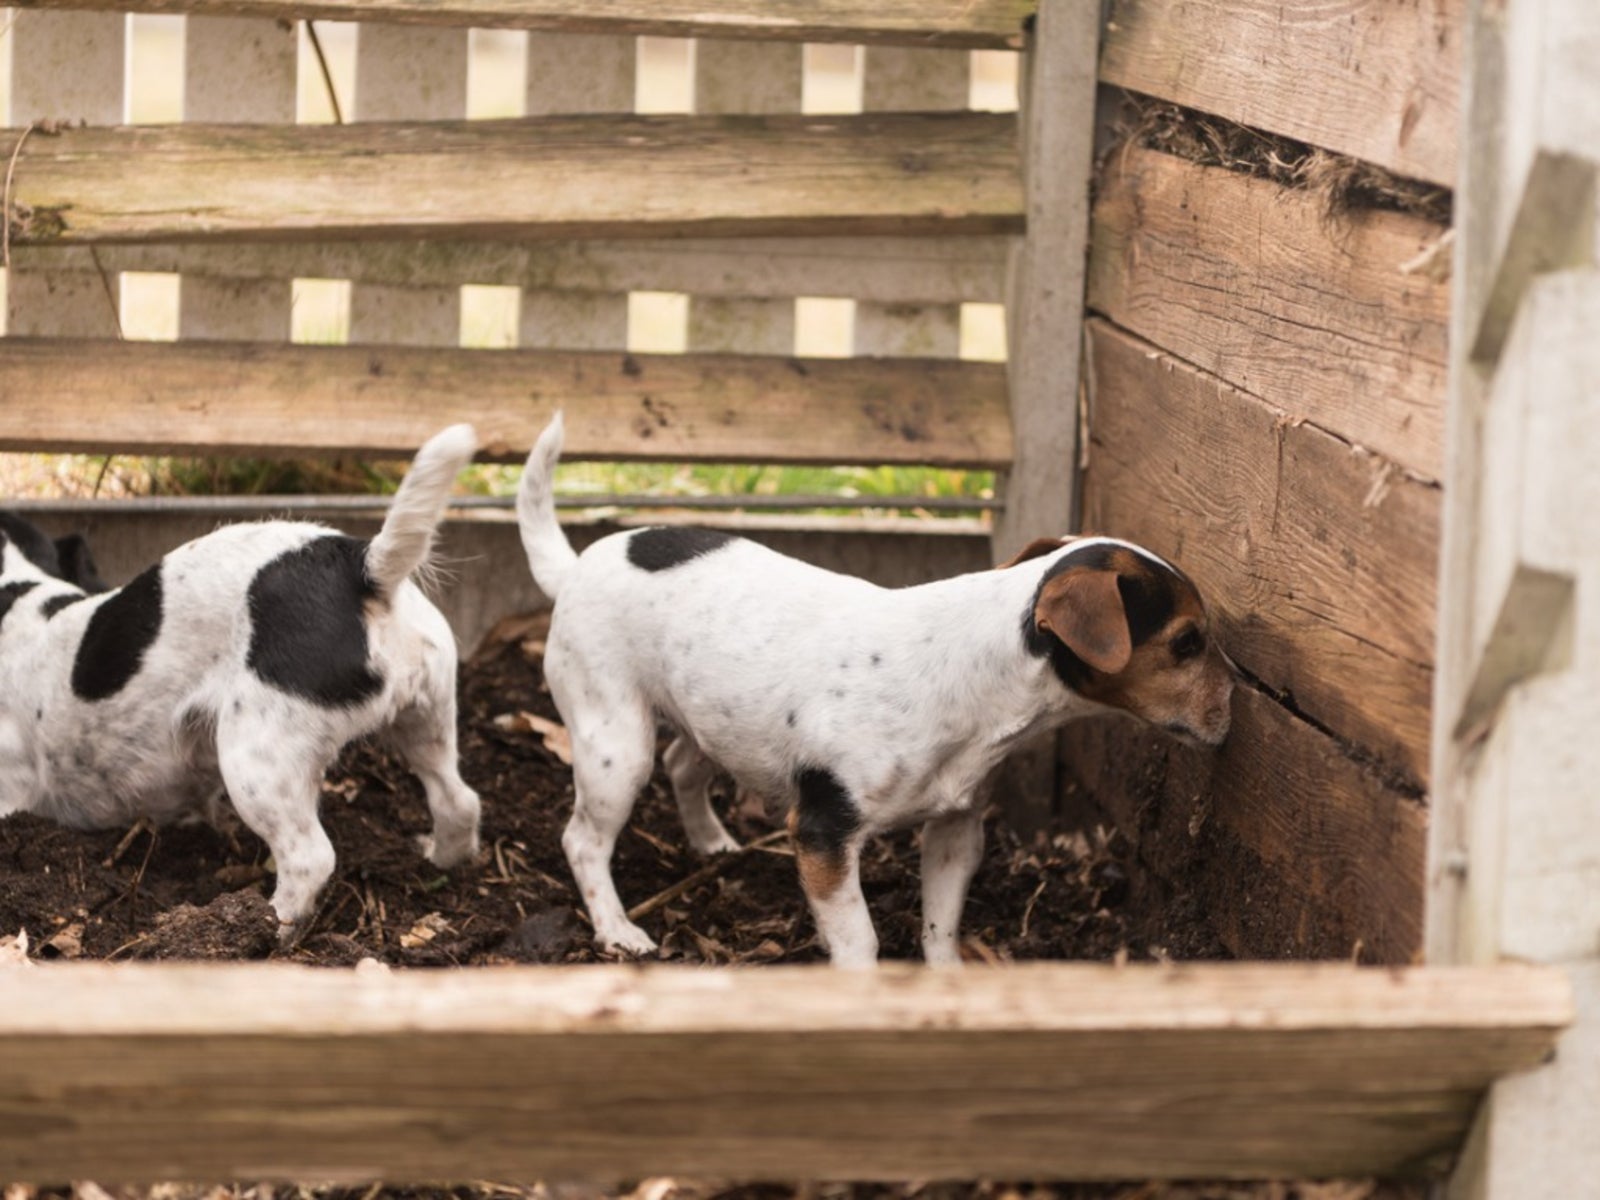 Pet Poop Composting - Can Dog Feces Go In Compost